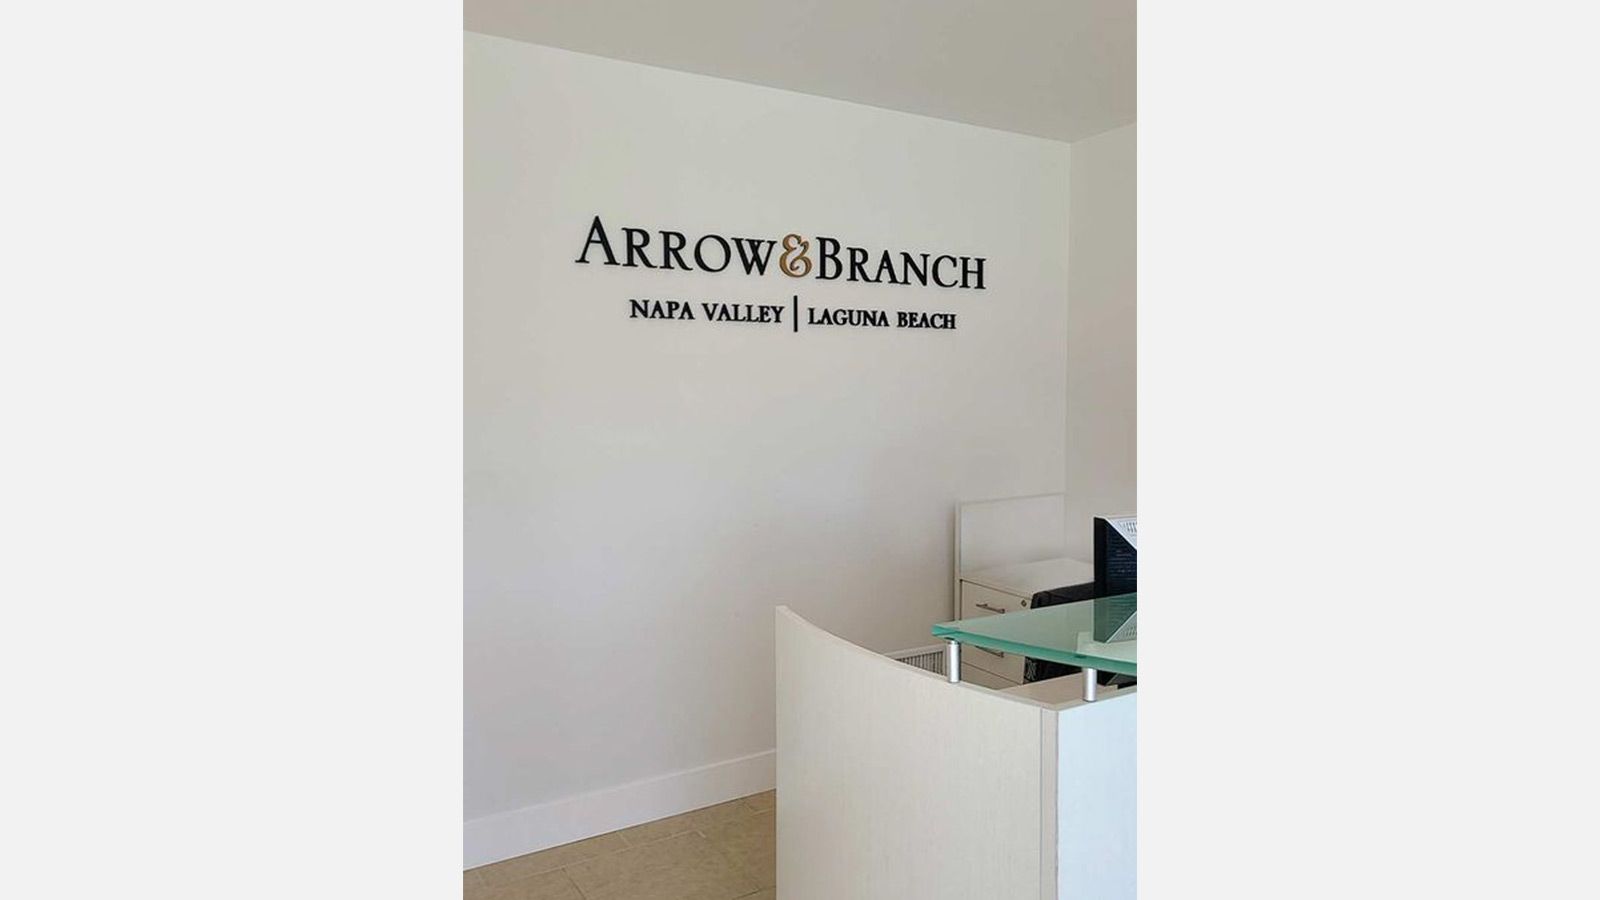 Arrow & Branch lobby sign attached to the wall